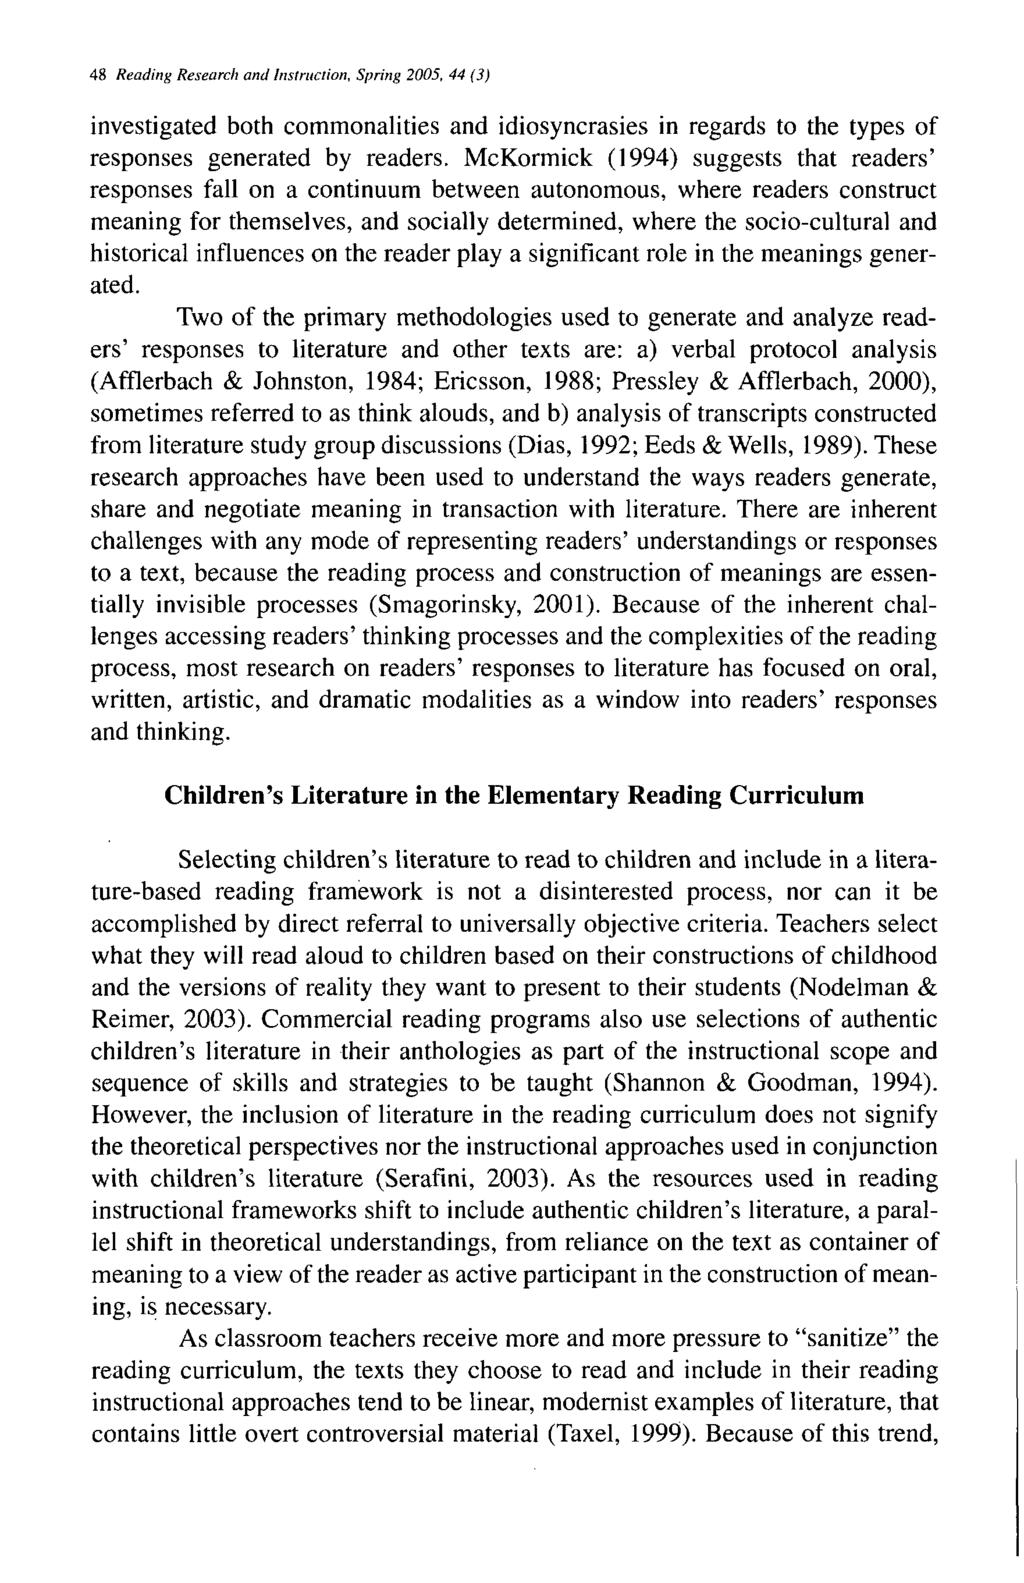 48 Reading Research and Instruction, Spring 2005, 44 (3) investigated both commonalities and idiosyncrasies in regards to the types of responses generated by readers.